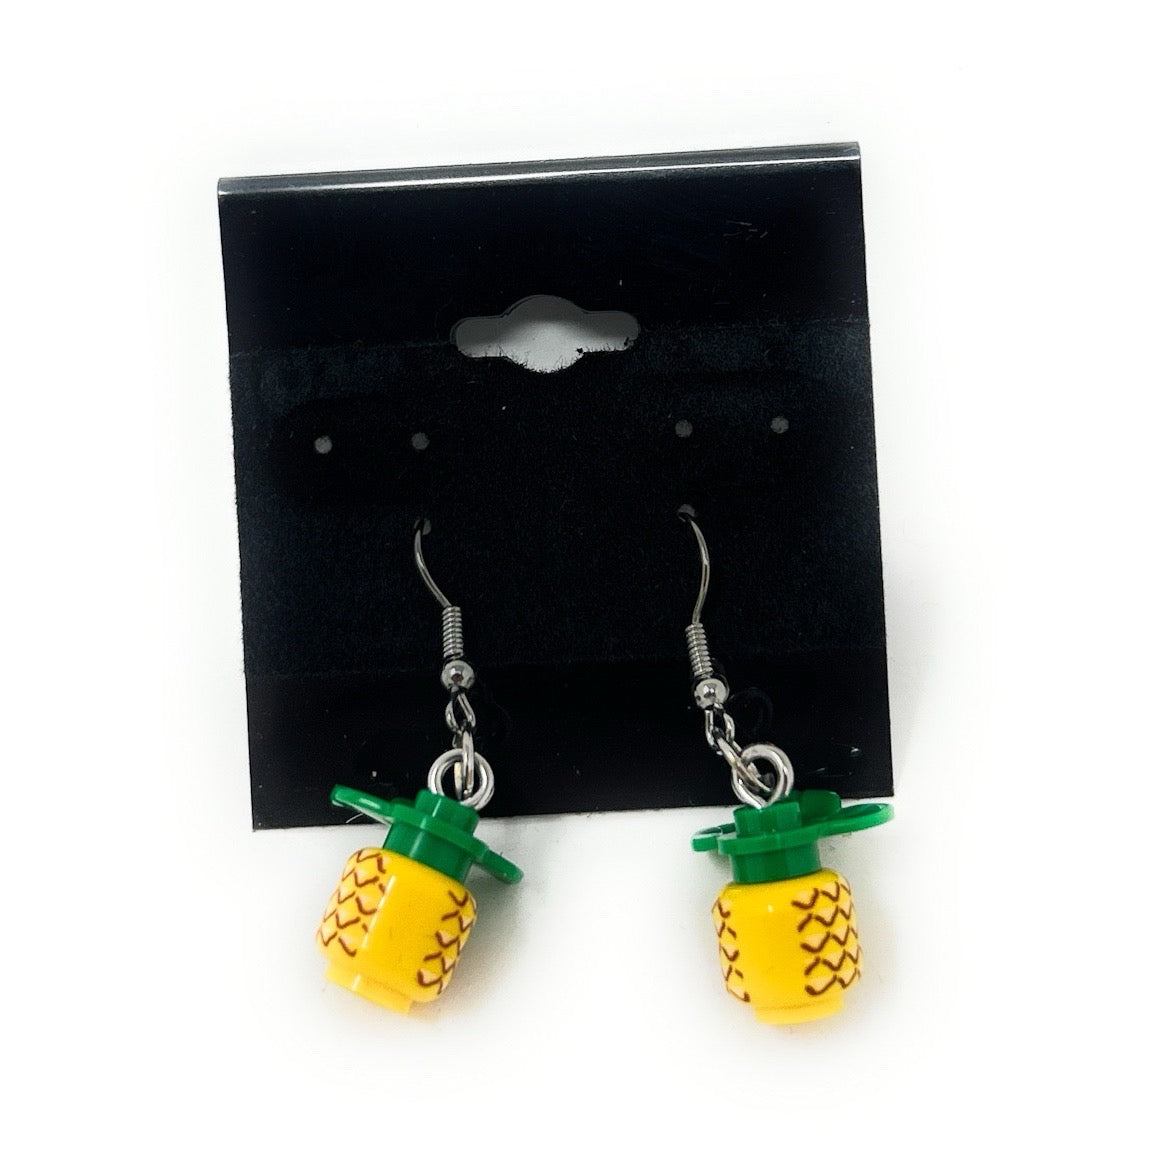 Pineapple Earrings made from LEGO parts - B3 Customs